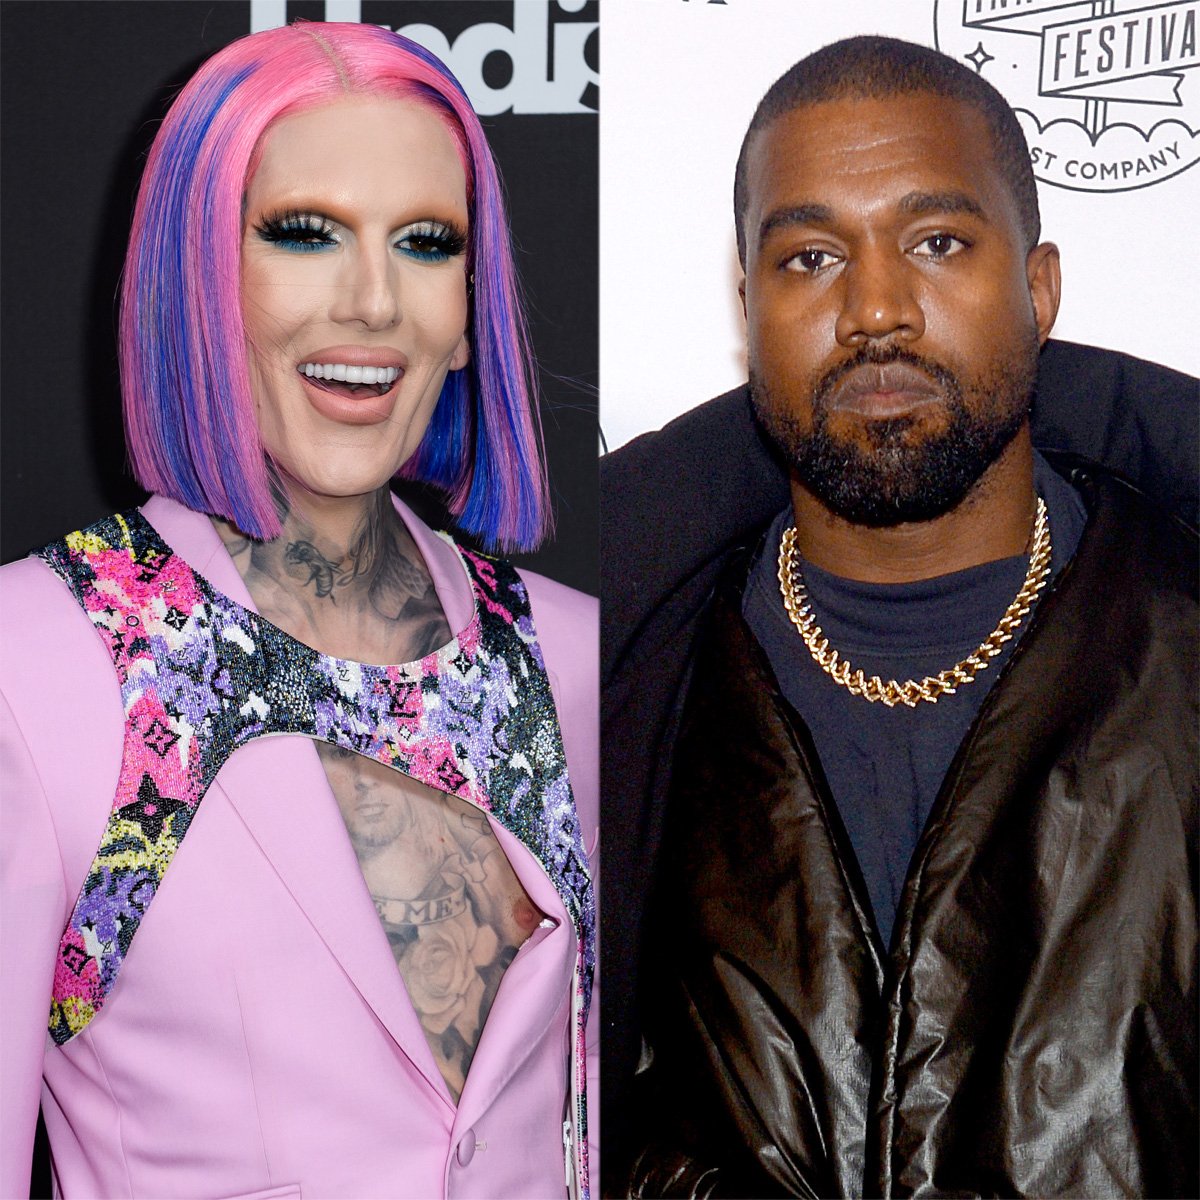 Jeffree Star Less Well-Known and Liked Since Wyoming Move, Data Shows